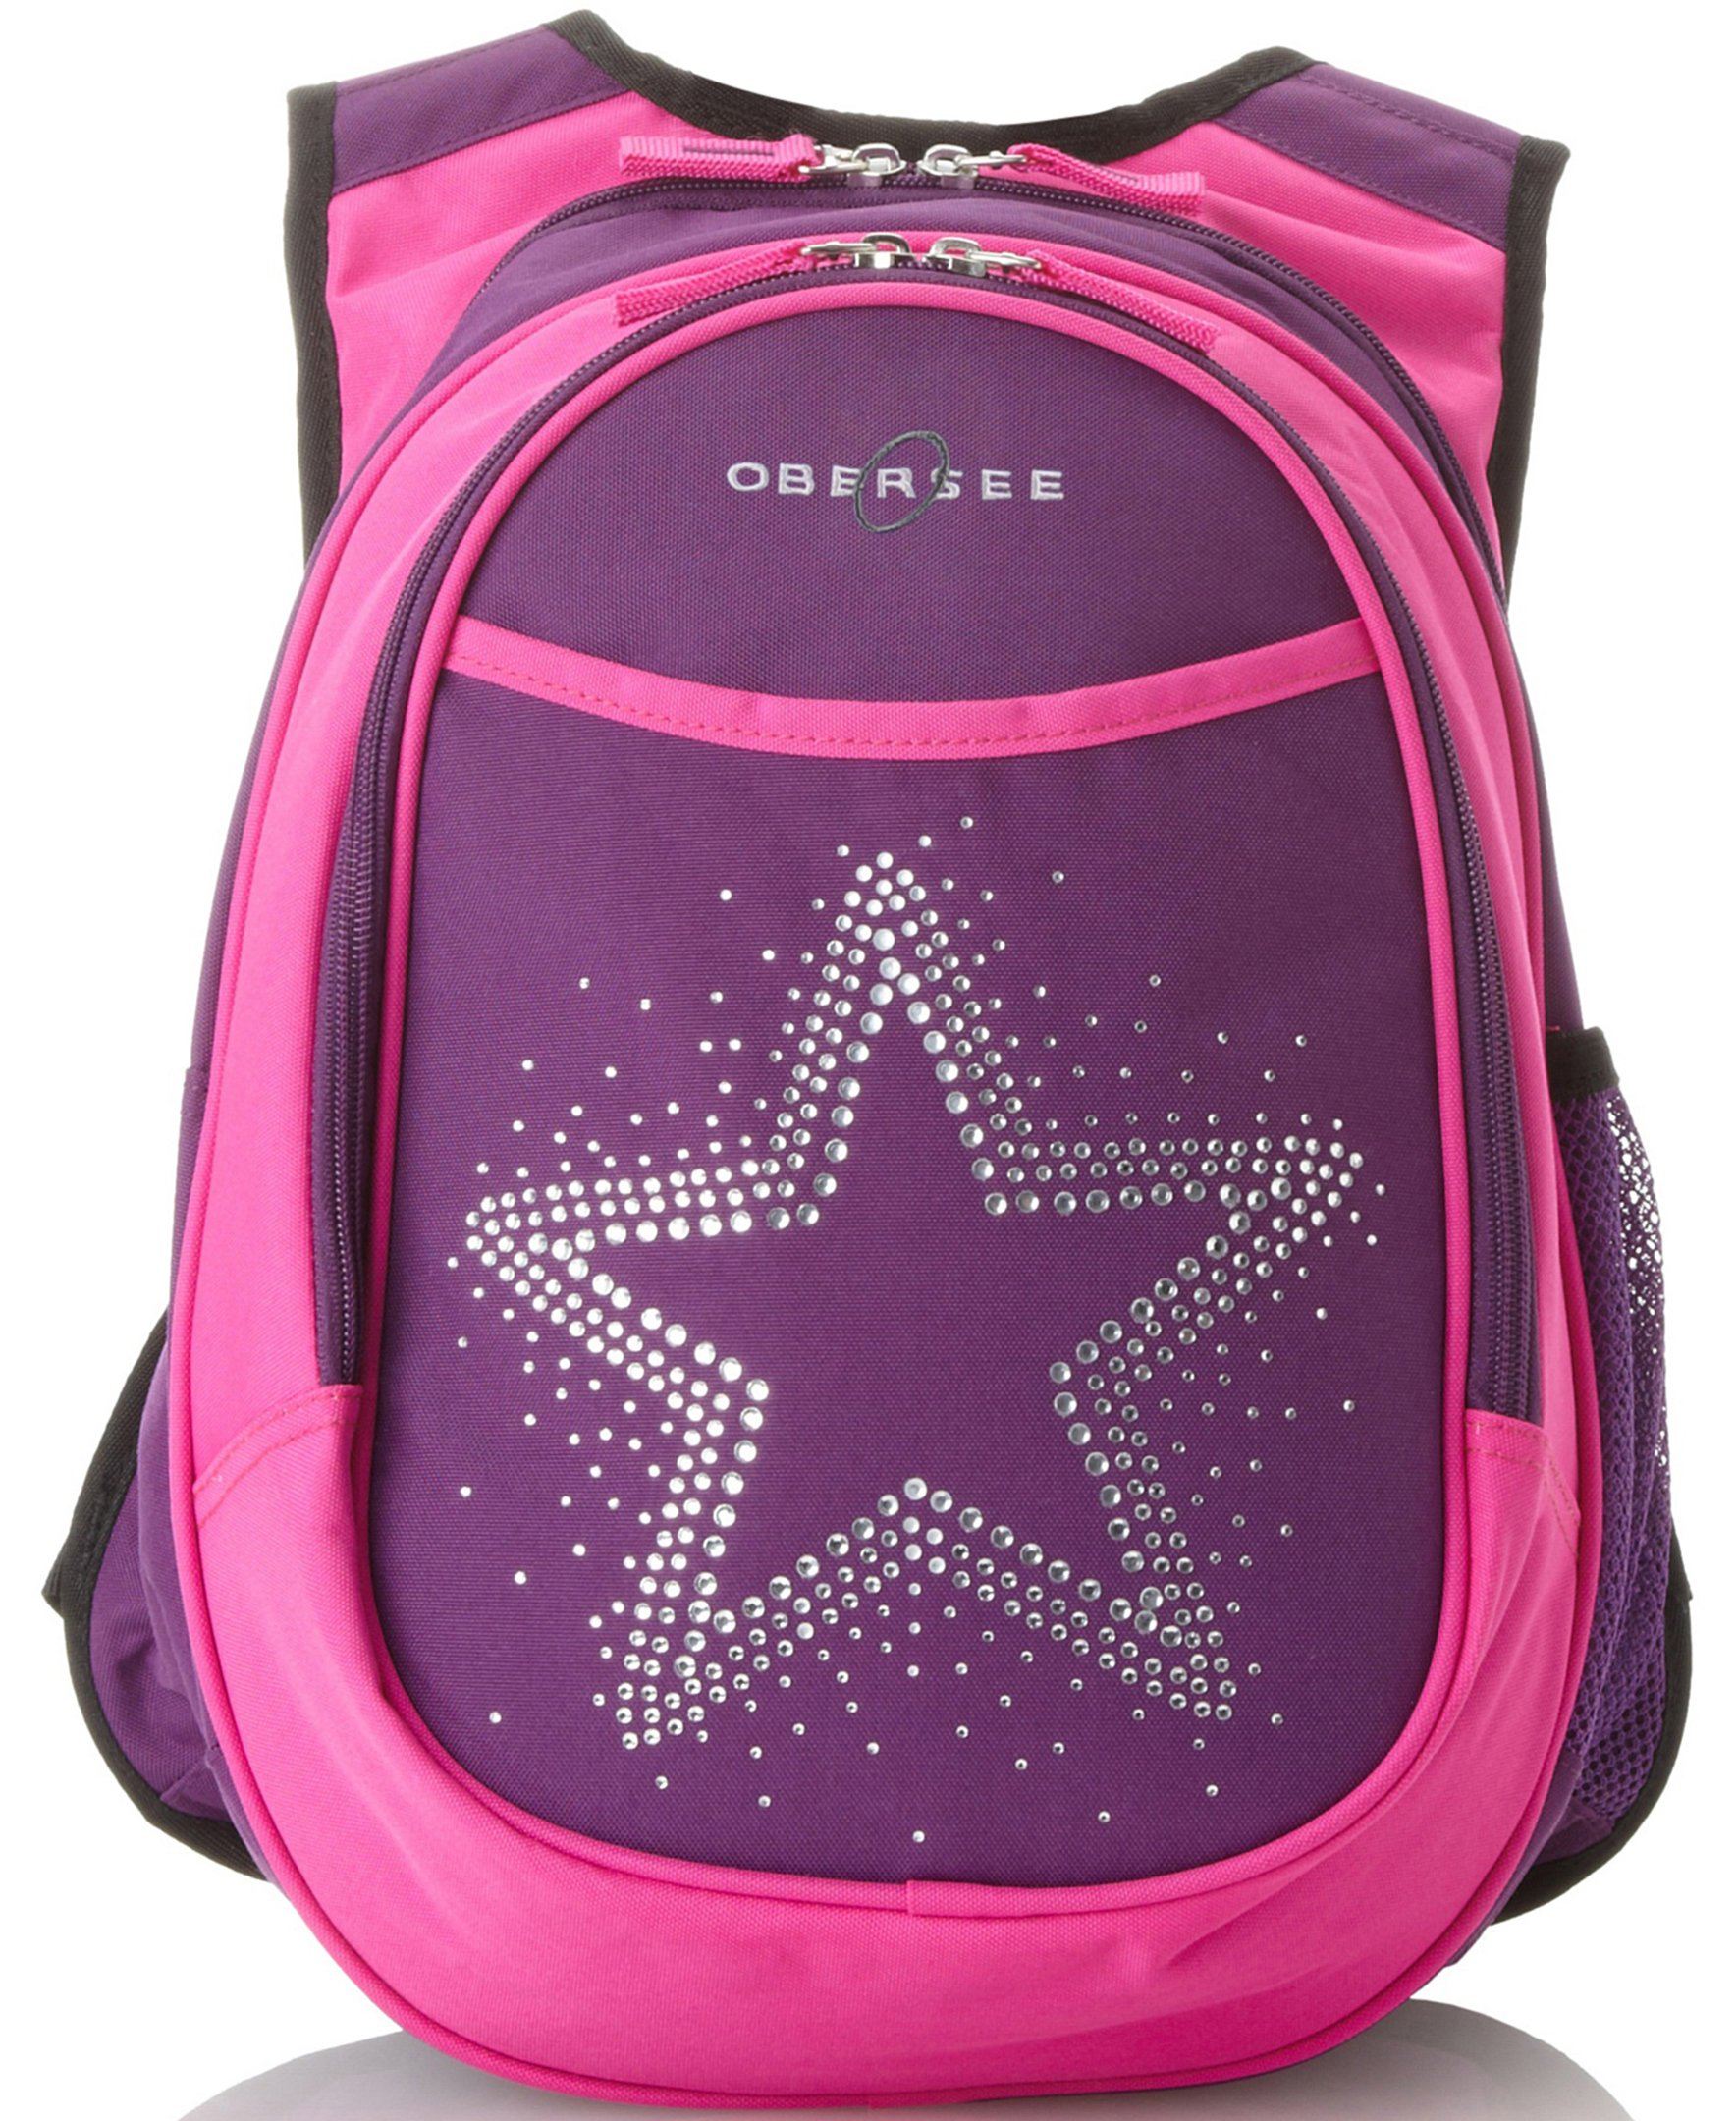 O3KCBP003 Obersee Mini Preschool All-in-One Backpack for Toddlers and Kids with integrated Insulated Cooler | Bling Rhinestone Star - image 1 of 5